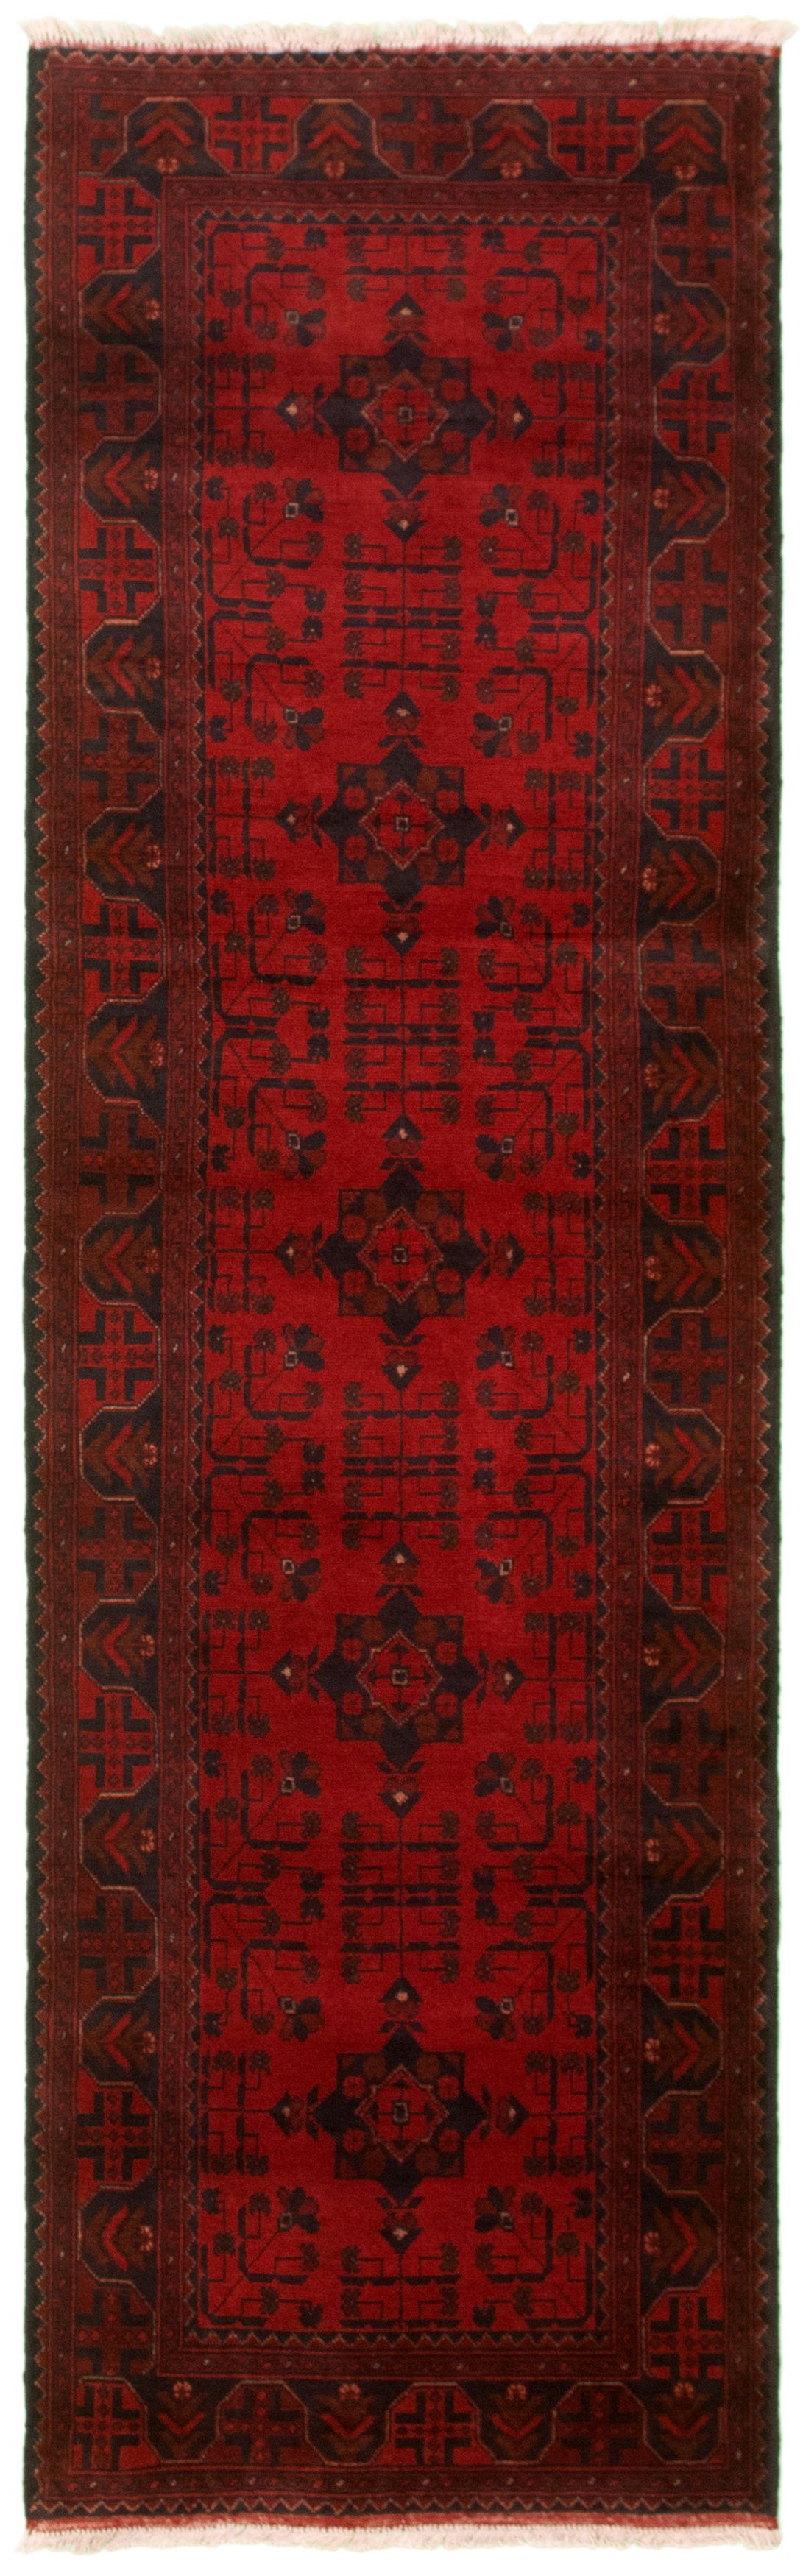 Hand-knotted Finest Khal Mohammadi Red Wool Rug 2'9" x 9'5"  Size: 2'9" x 9'5"  